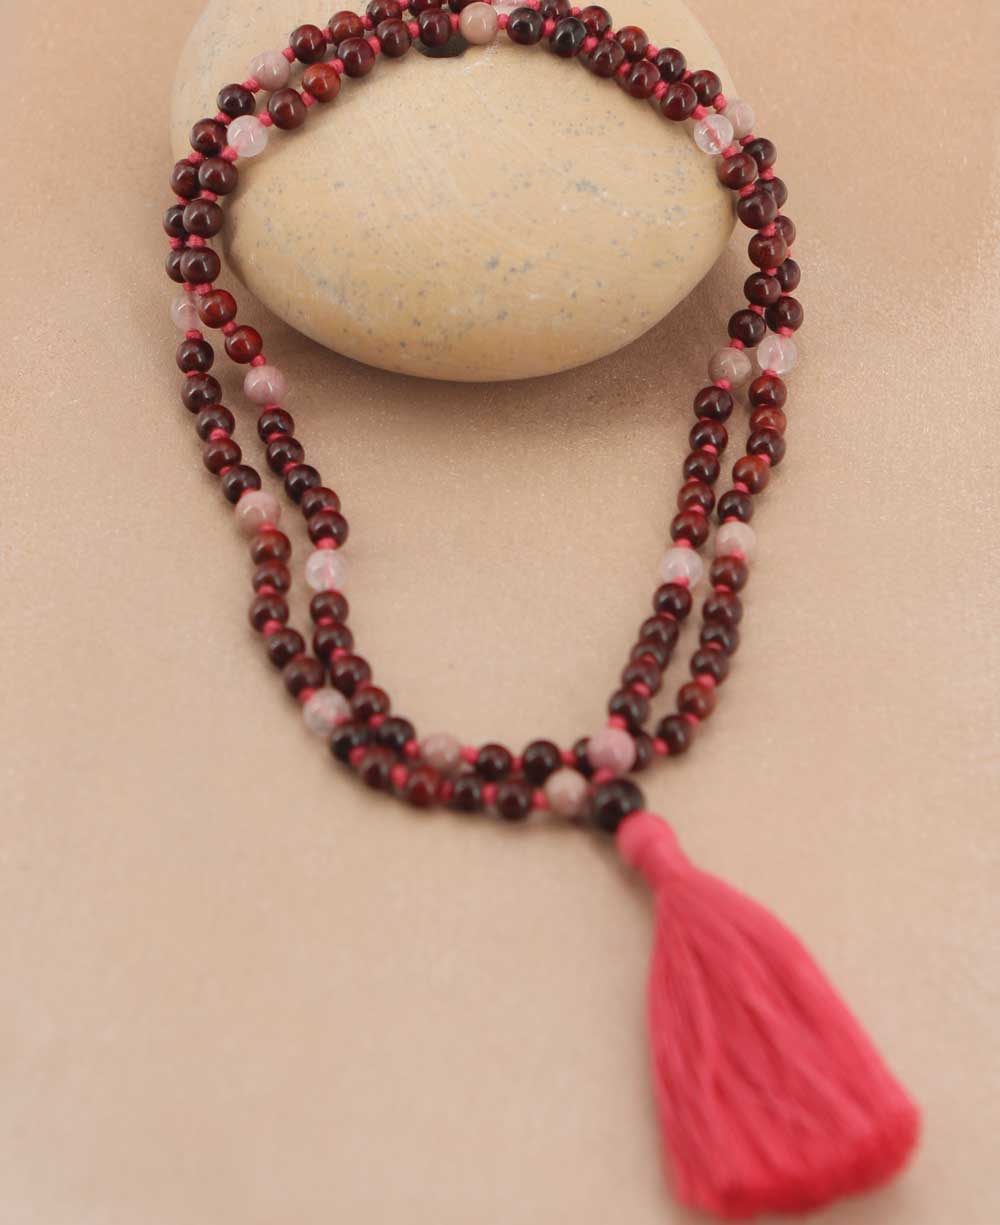 Love and Compassion Rosewood Meditation Mala With Rose Quartz and Rhodonite - Prayer Beads